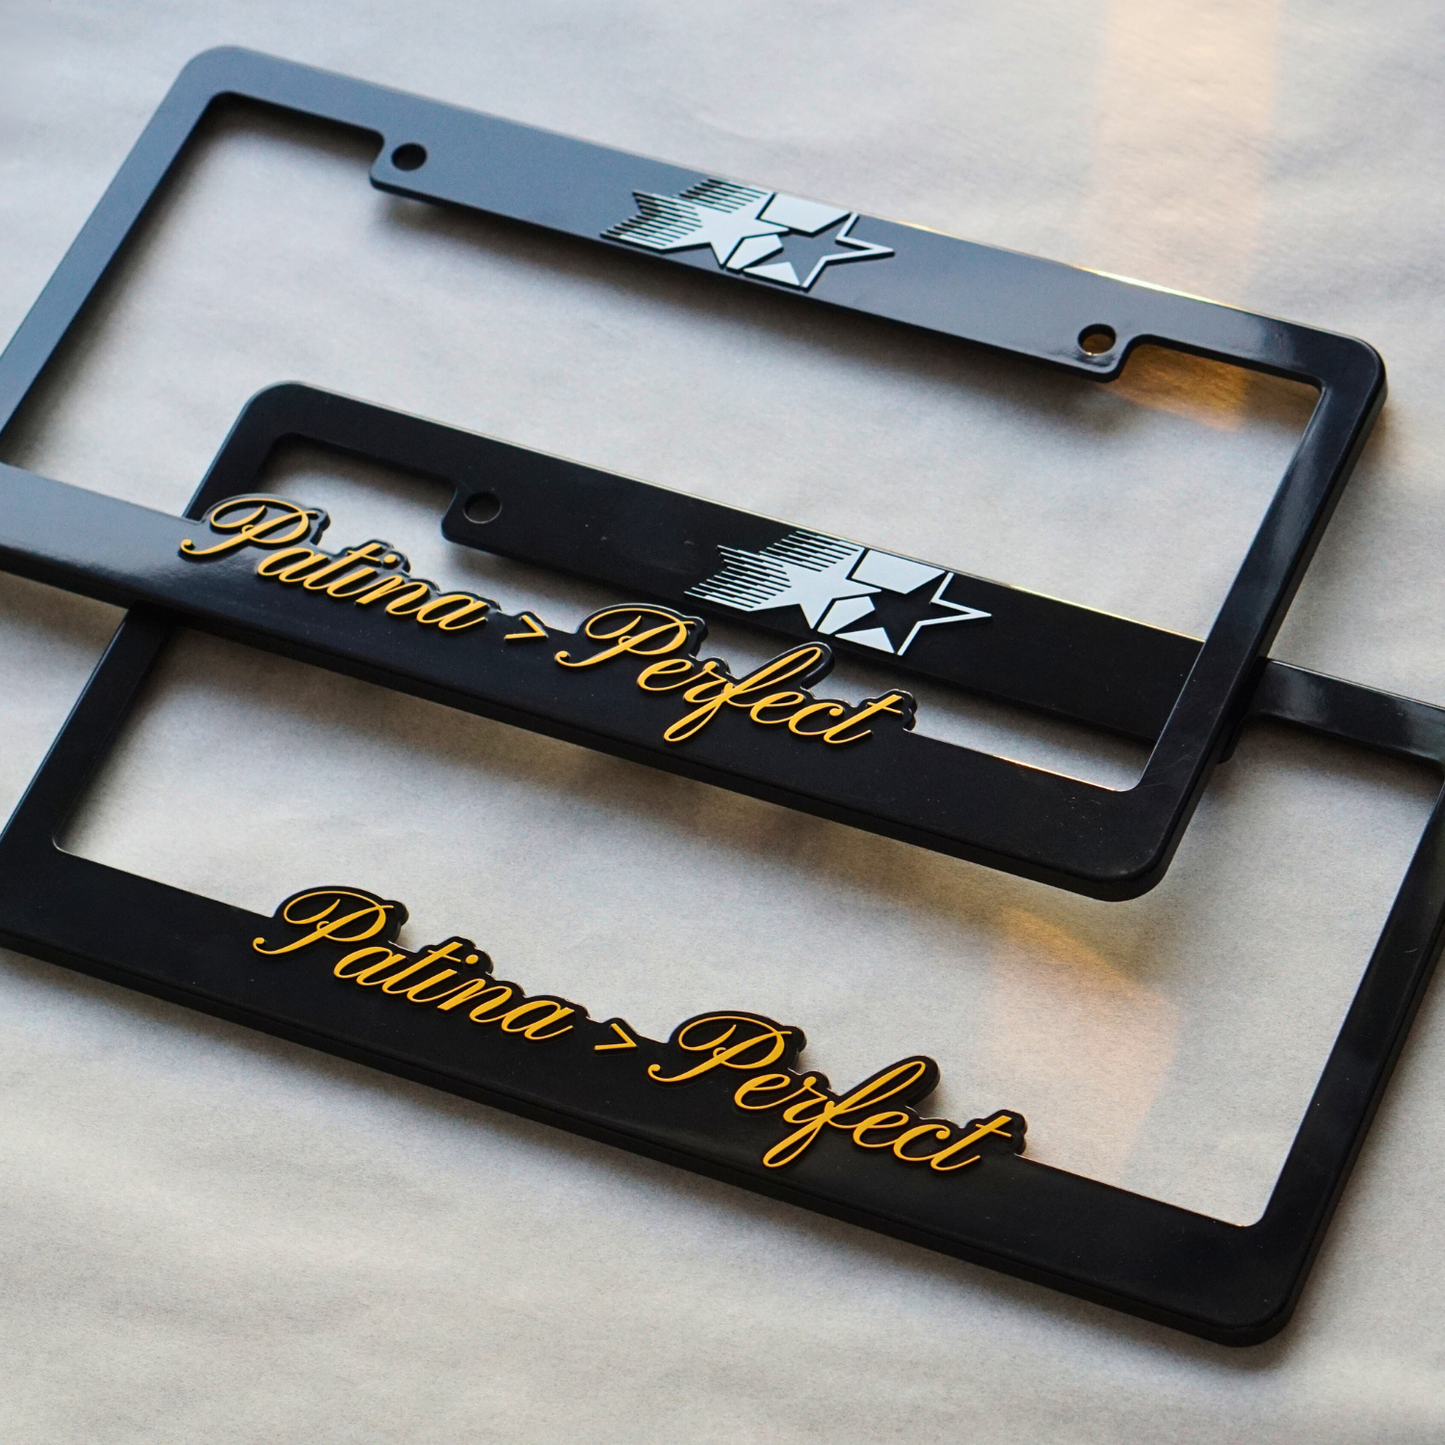 Patina > Perfect Plate Frame